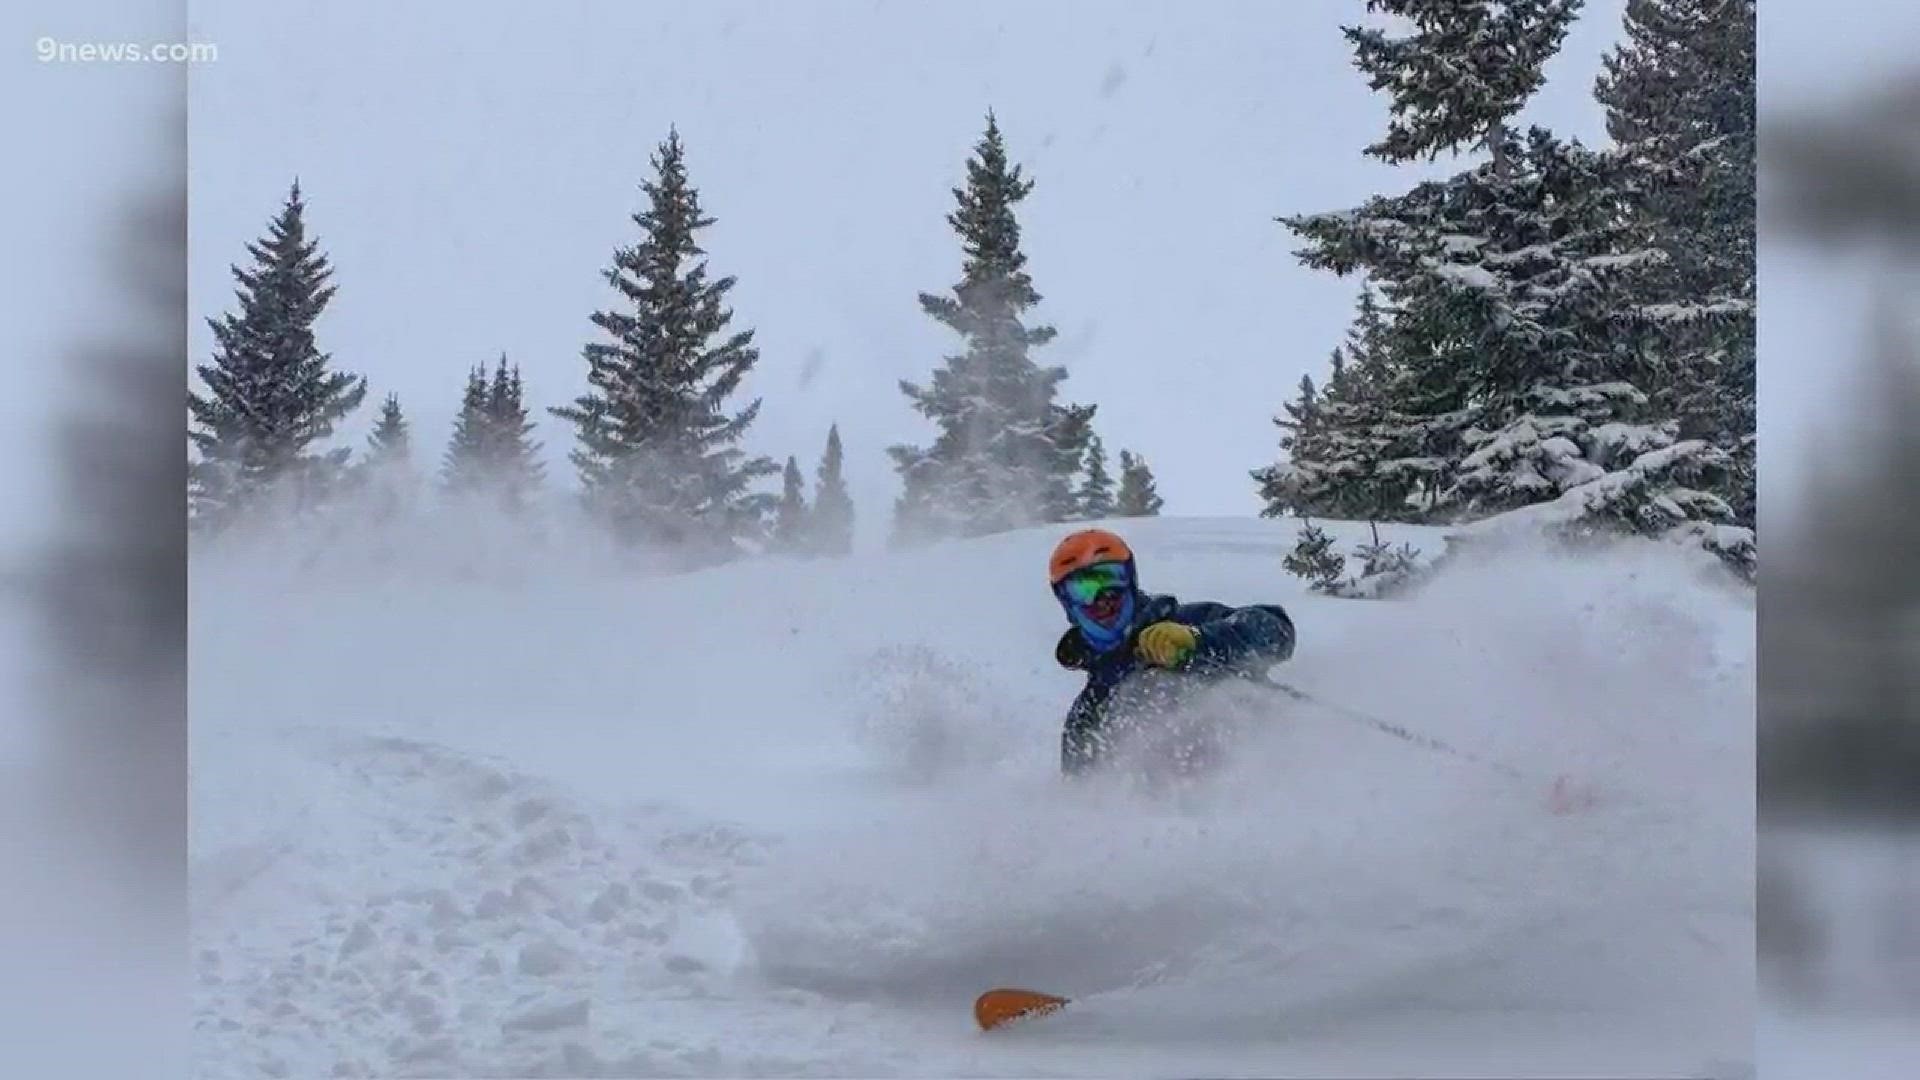 The avalanche watch is especially bad in the Aspen area. 9NEWS anchors Kristen Aguirre and Ryan Haarer speak to an expert at Aspen Snowmass to find out how officials keep people safe in the mountains.